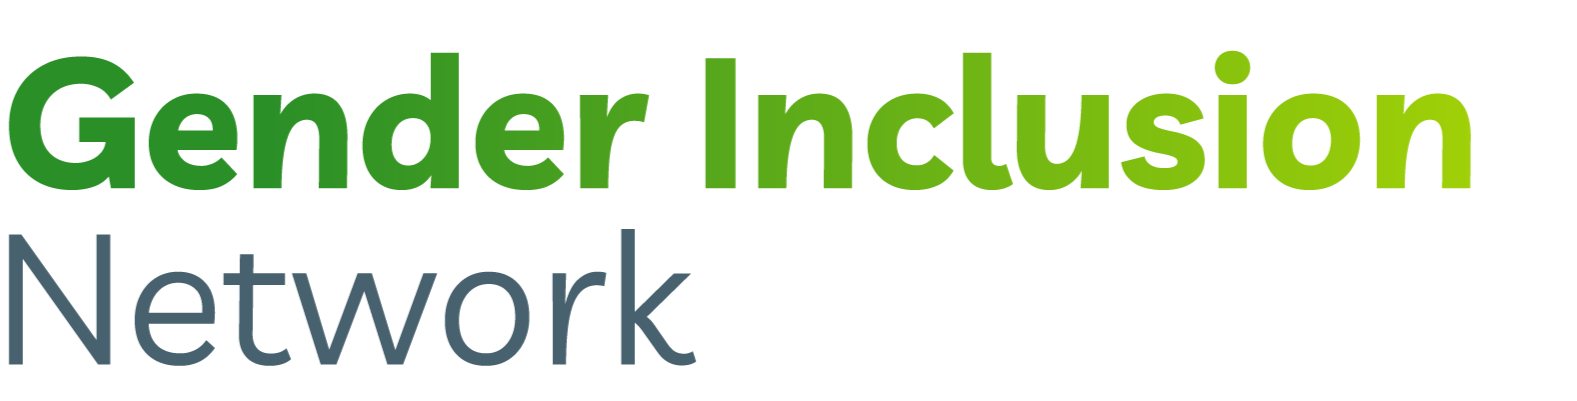 LV Jobs - Careers website - Inclusion and Wellbeing - Networks - Gender Inclusion Network Logo.png